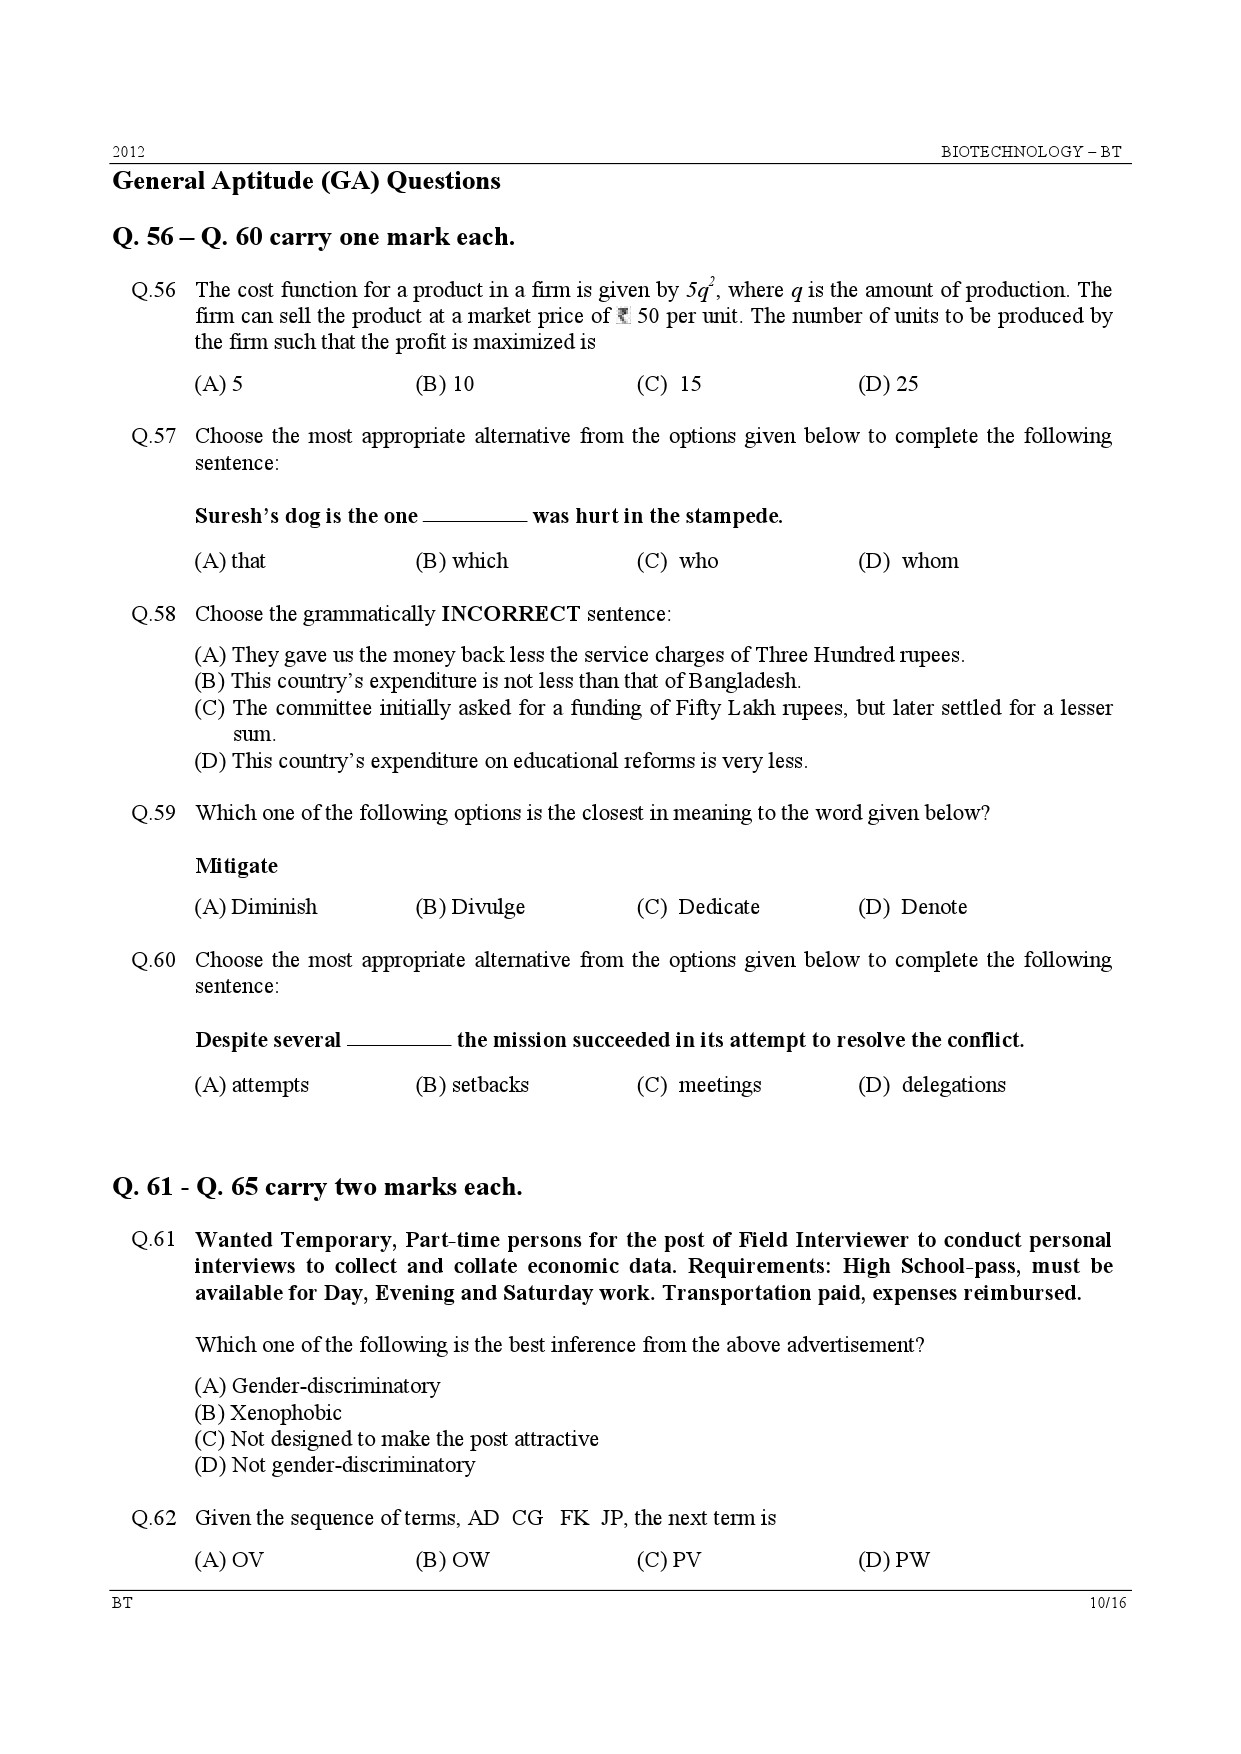 GATE Exam Question Paper 2012 Biotechnology 10